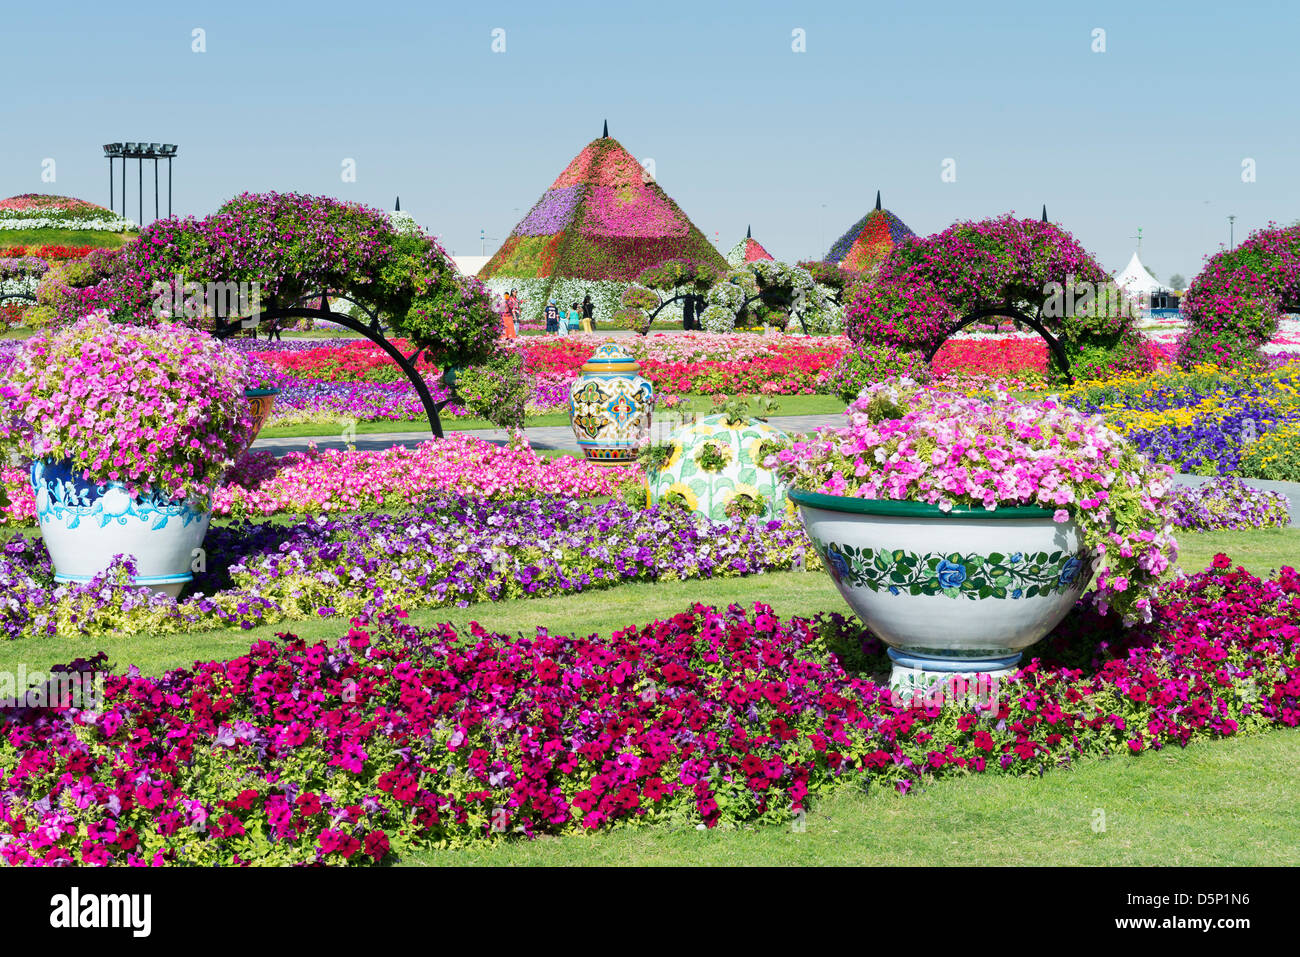 Miracle Garden in Dubai, Opened in March 2013 and claimed to be World's largest flower garden; United Arab Emirates Stock Photo